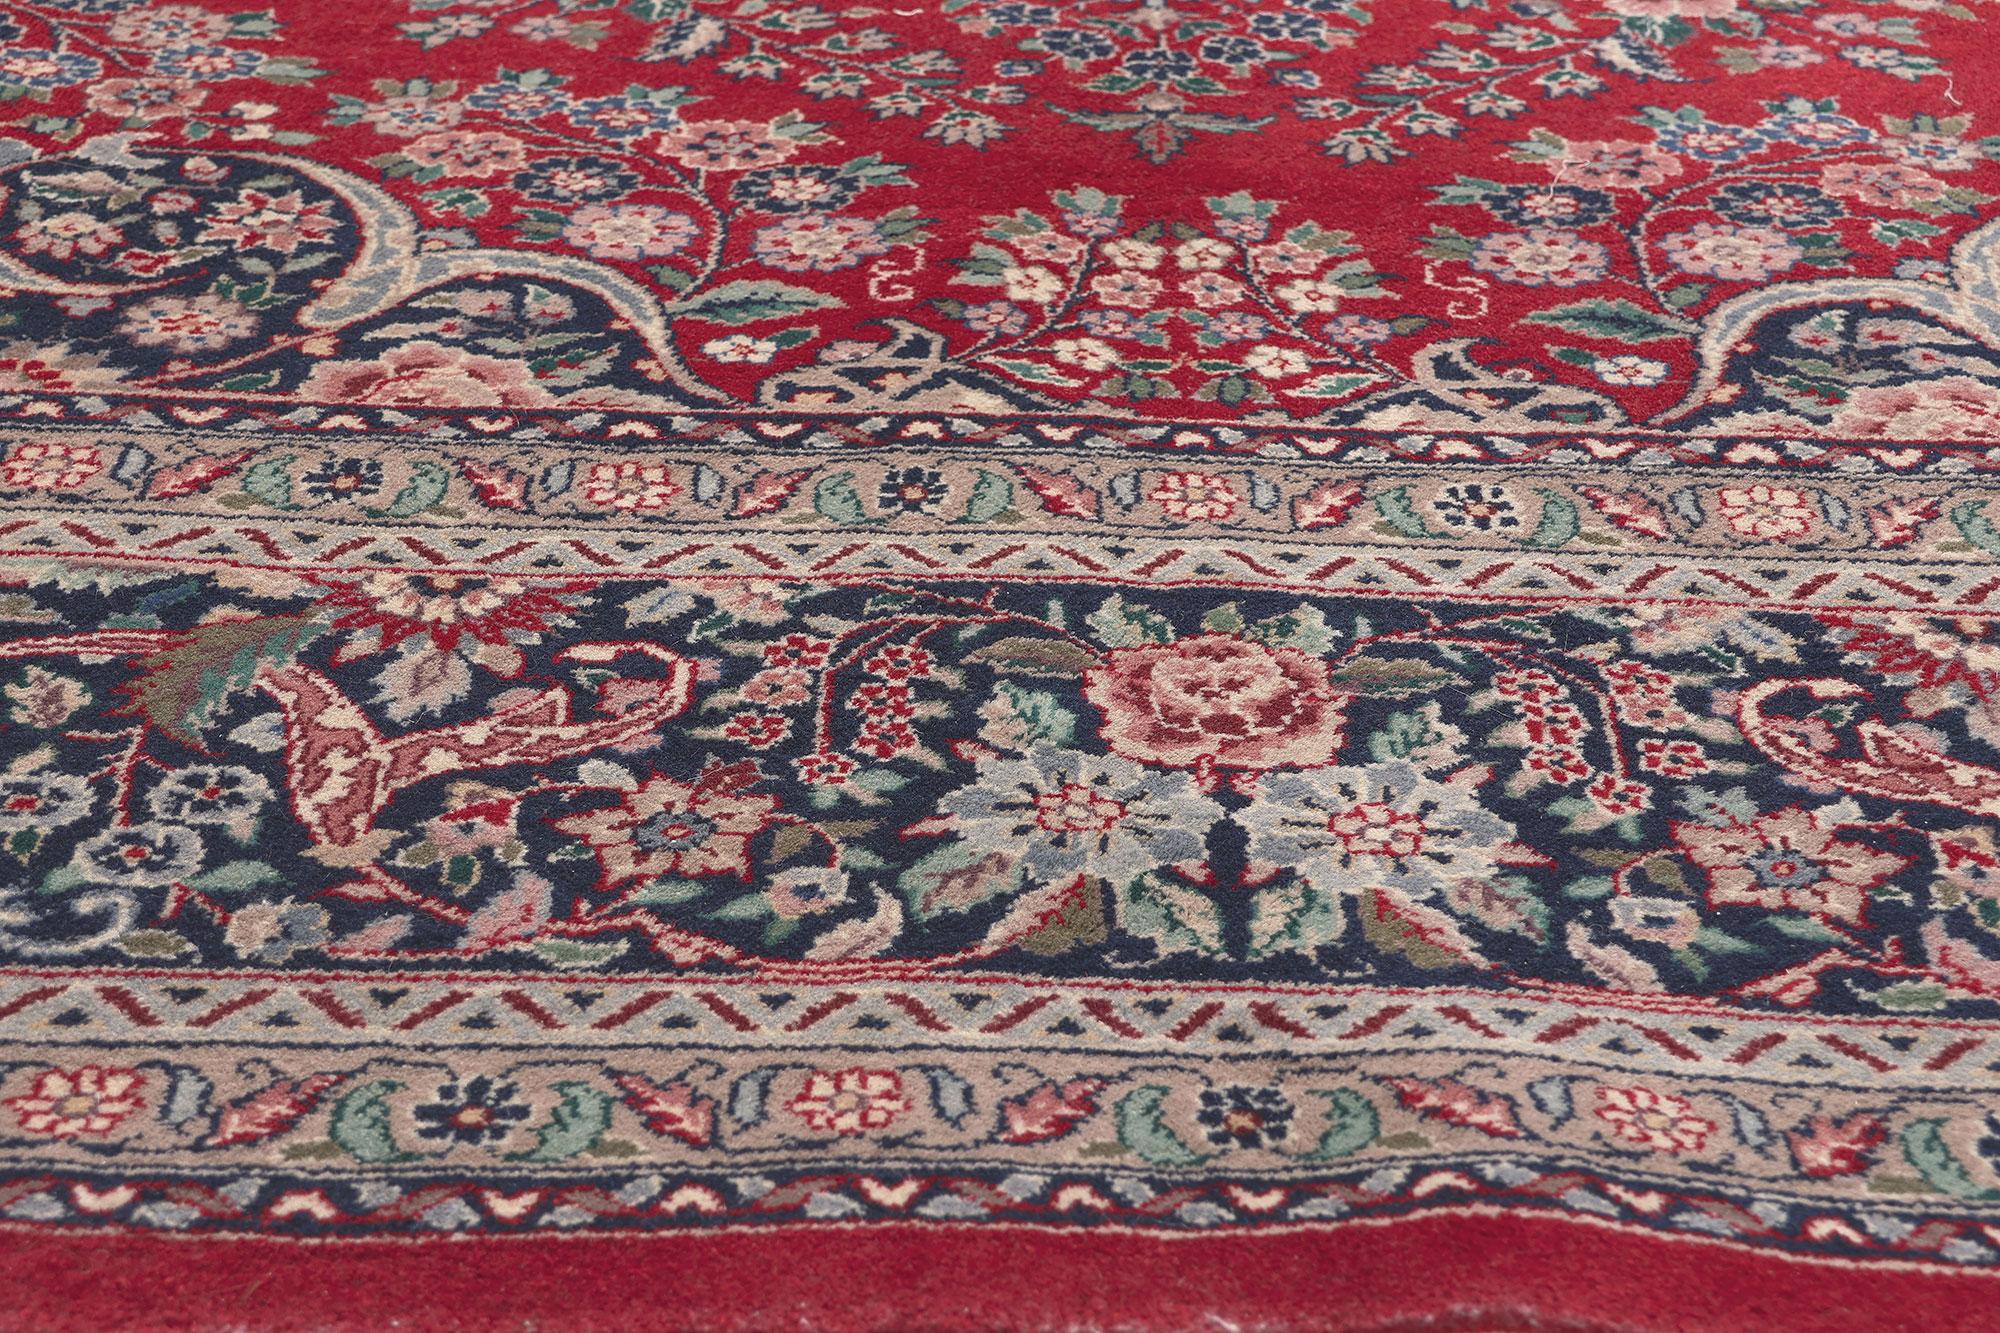 Vintage Persian Kerman Pakistani Rug, Regal Charm Meets Stately Decadence In Good Condition For Sale In Dallas, TX